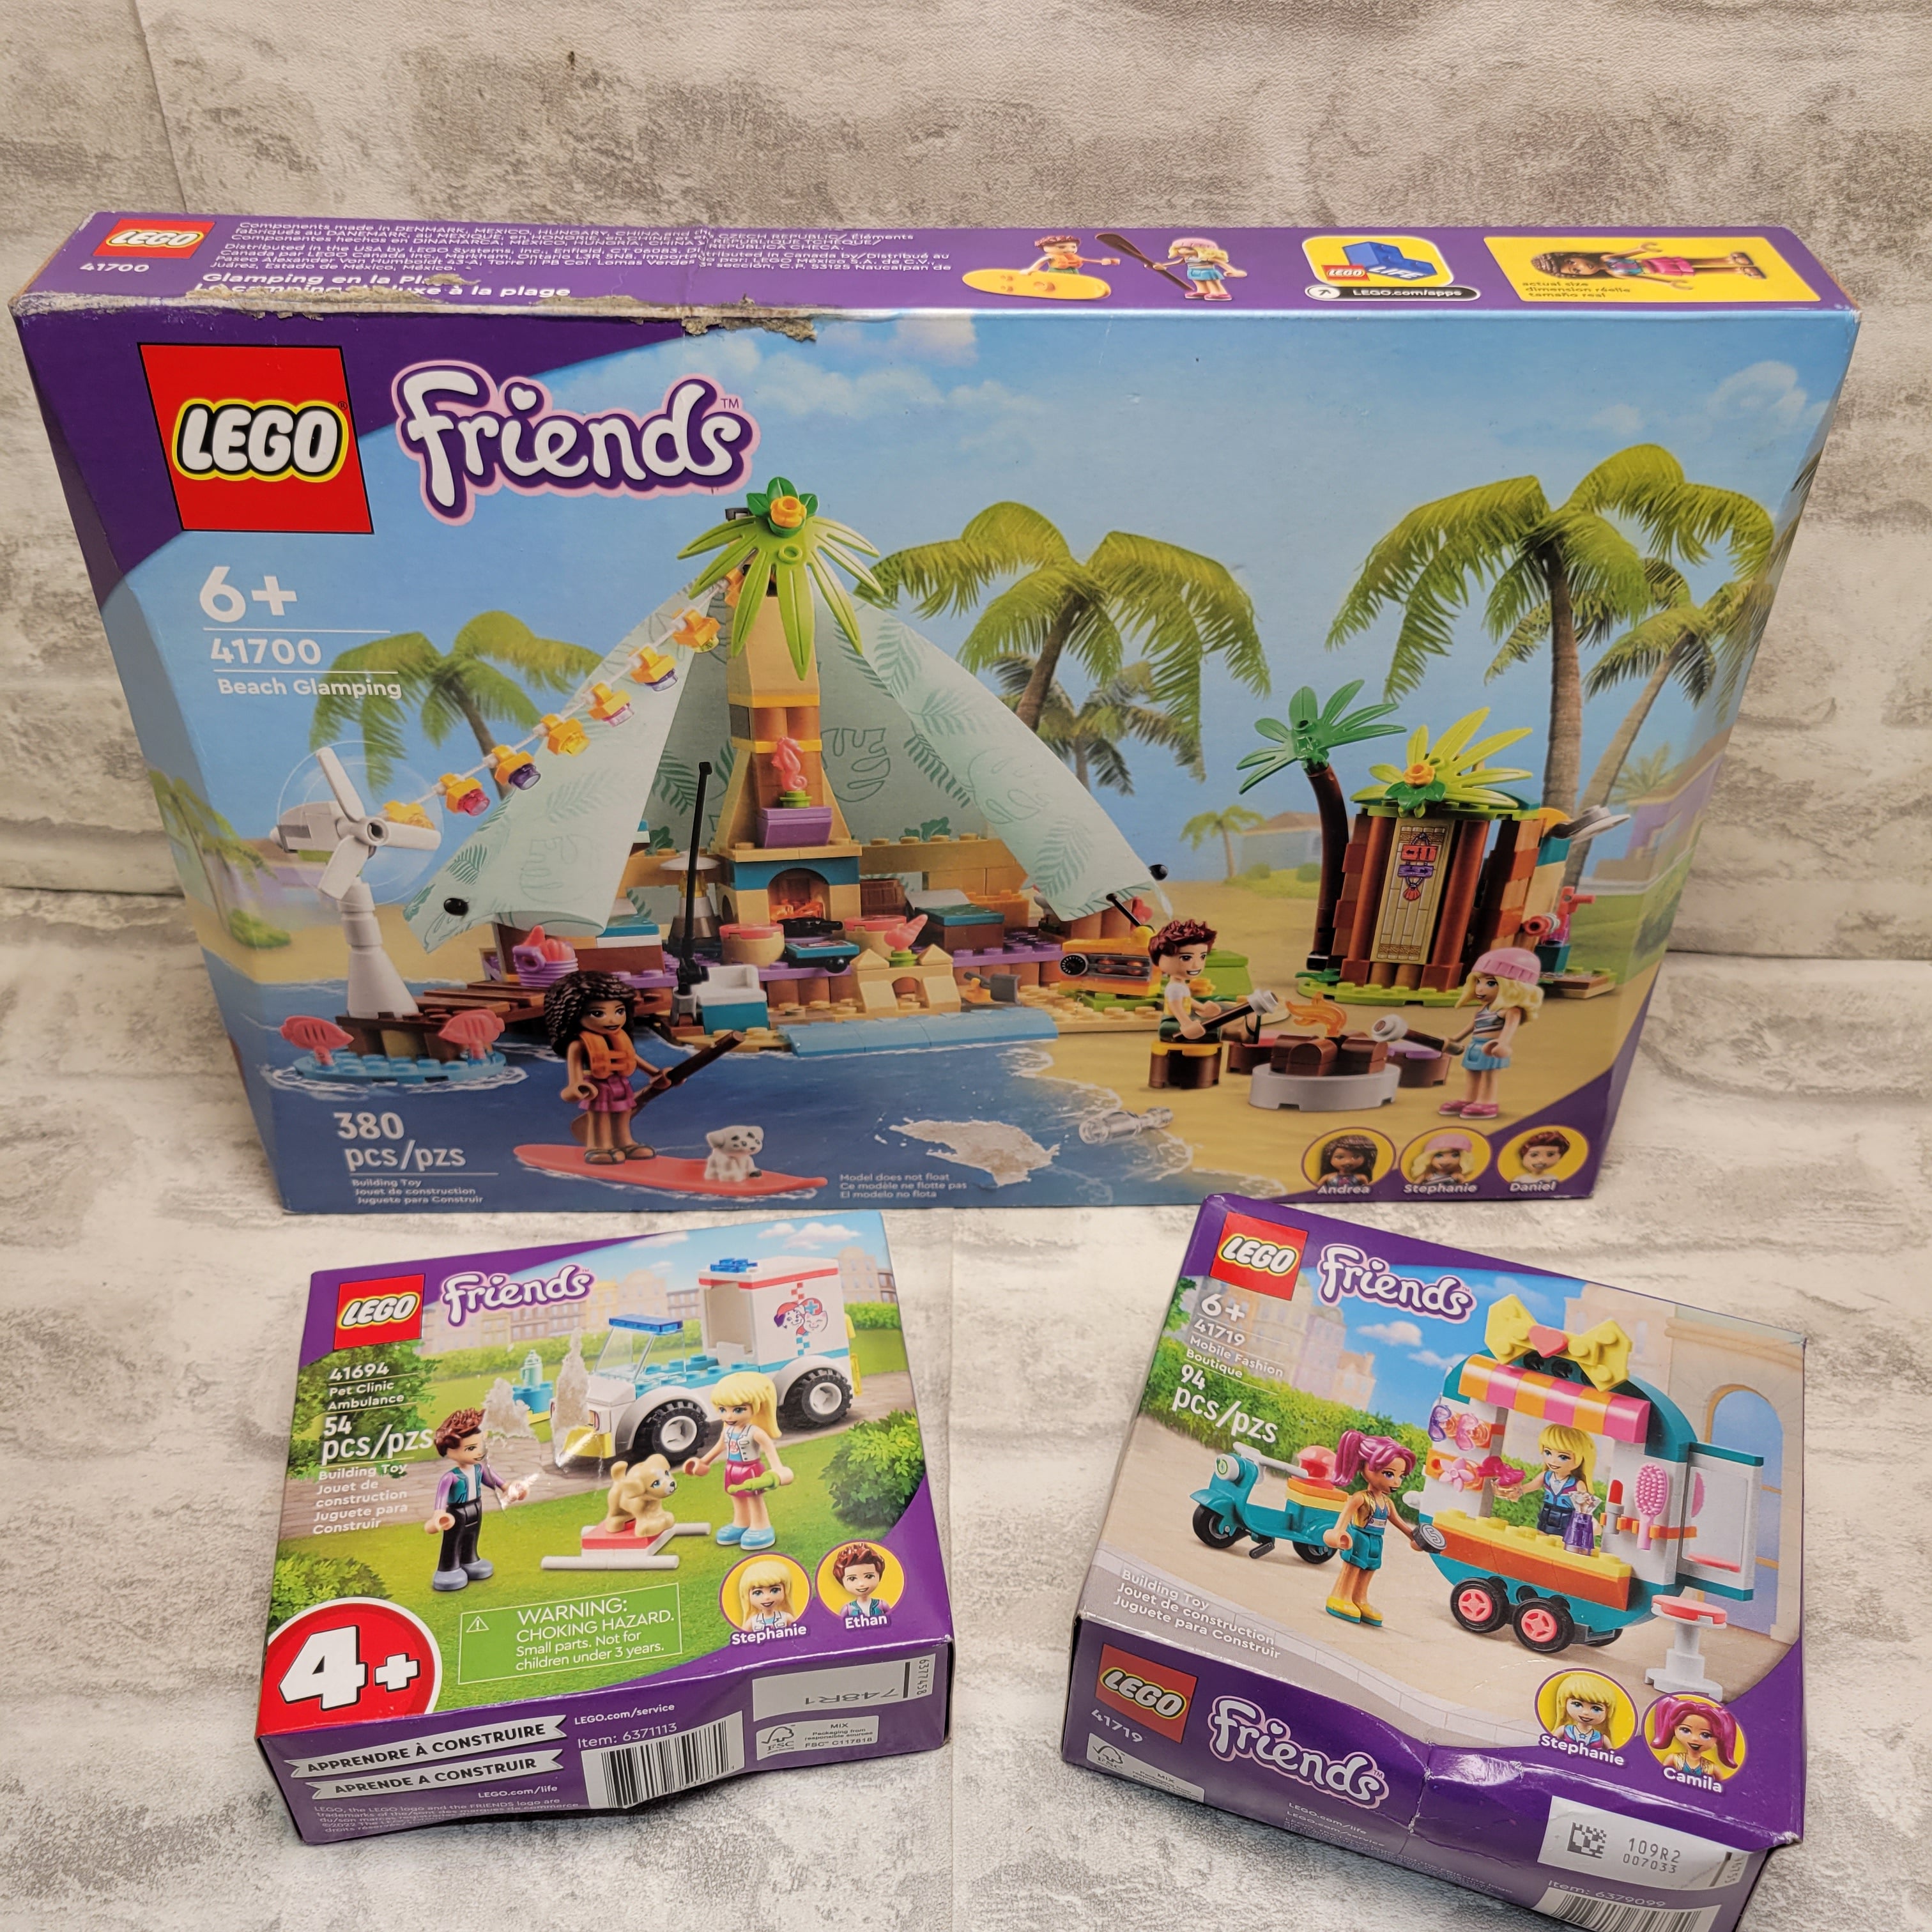 LEGO Friends Beach Glamping, Pet Clinic Ambulance, and Mobile Fashion Boutique (7922184126702)